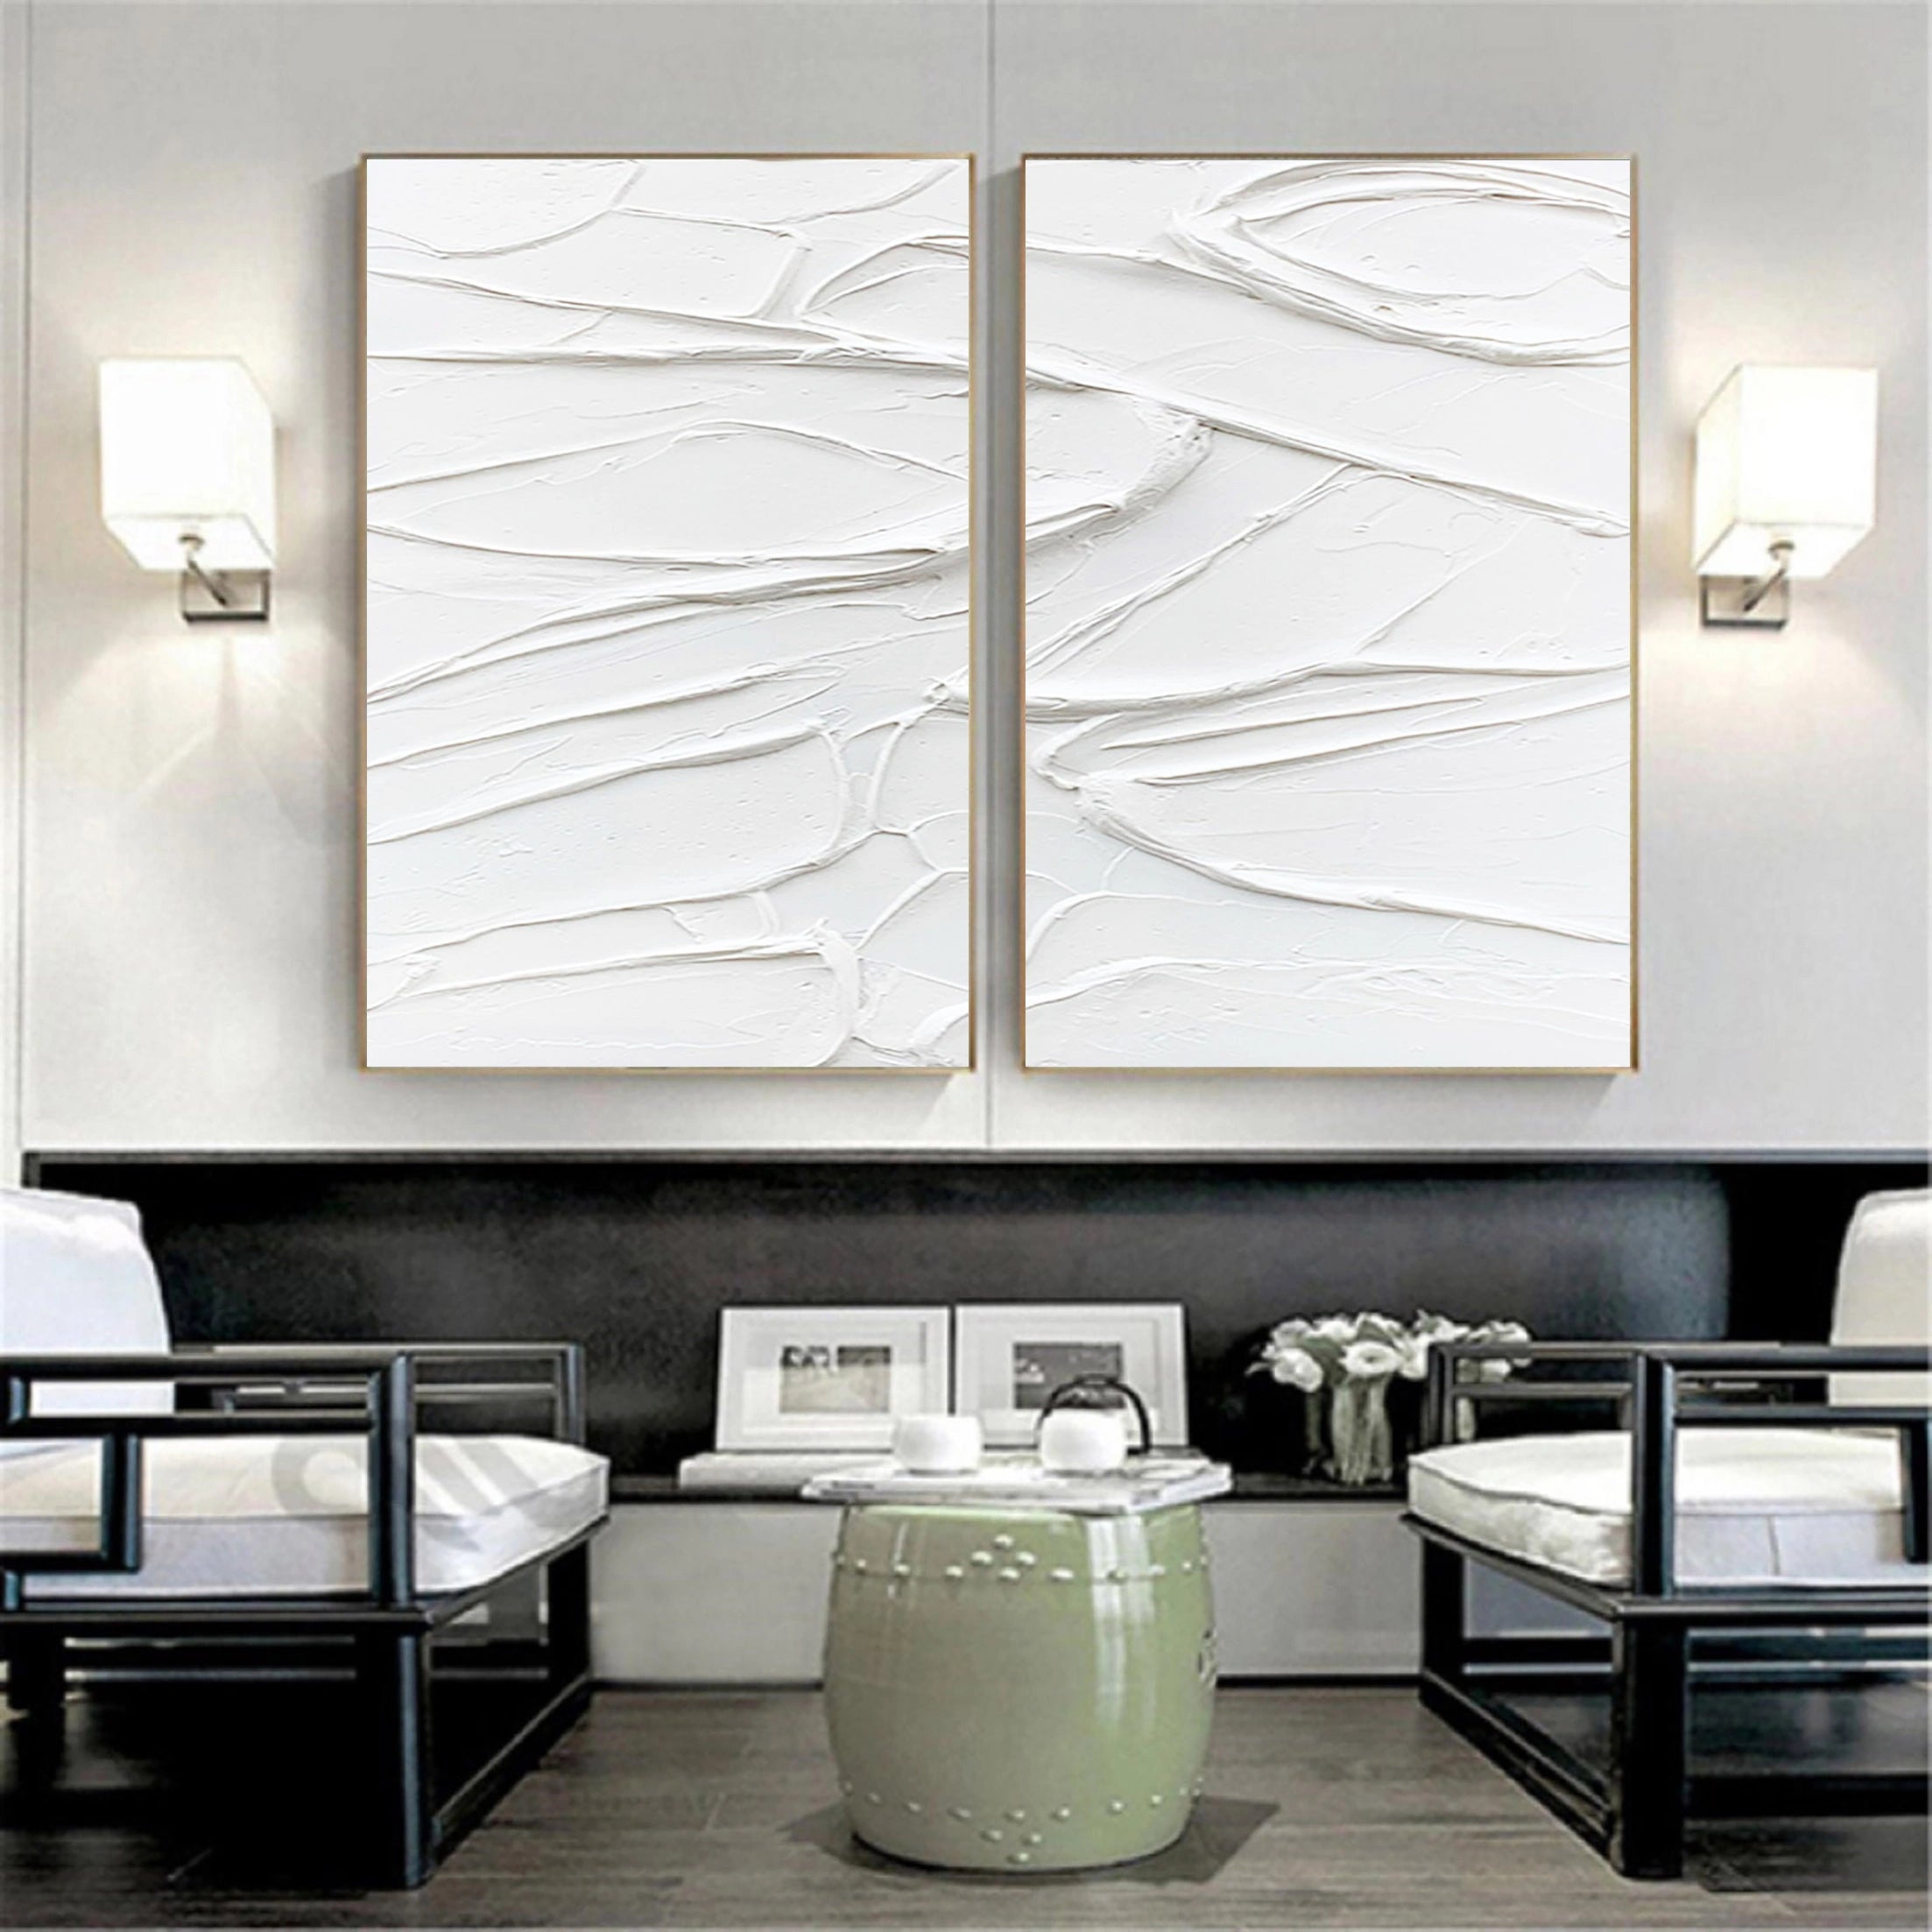 Set of 2 White Textured Plaster Art Canvas, Large Abstract Painting for Room Decor